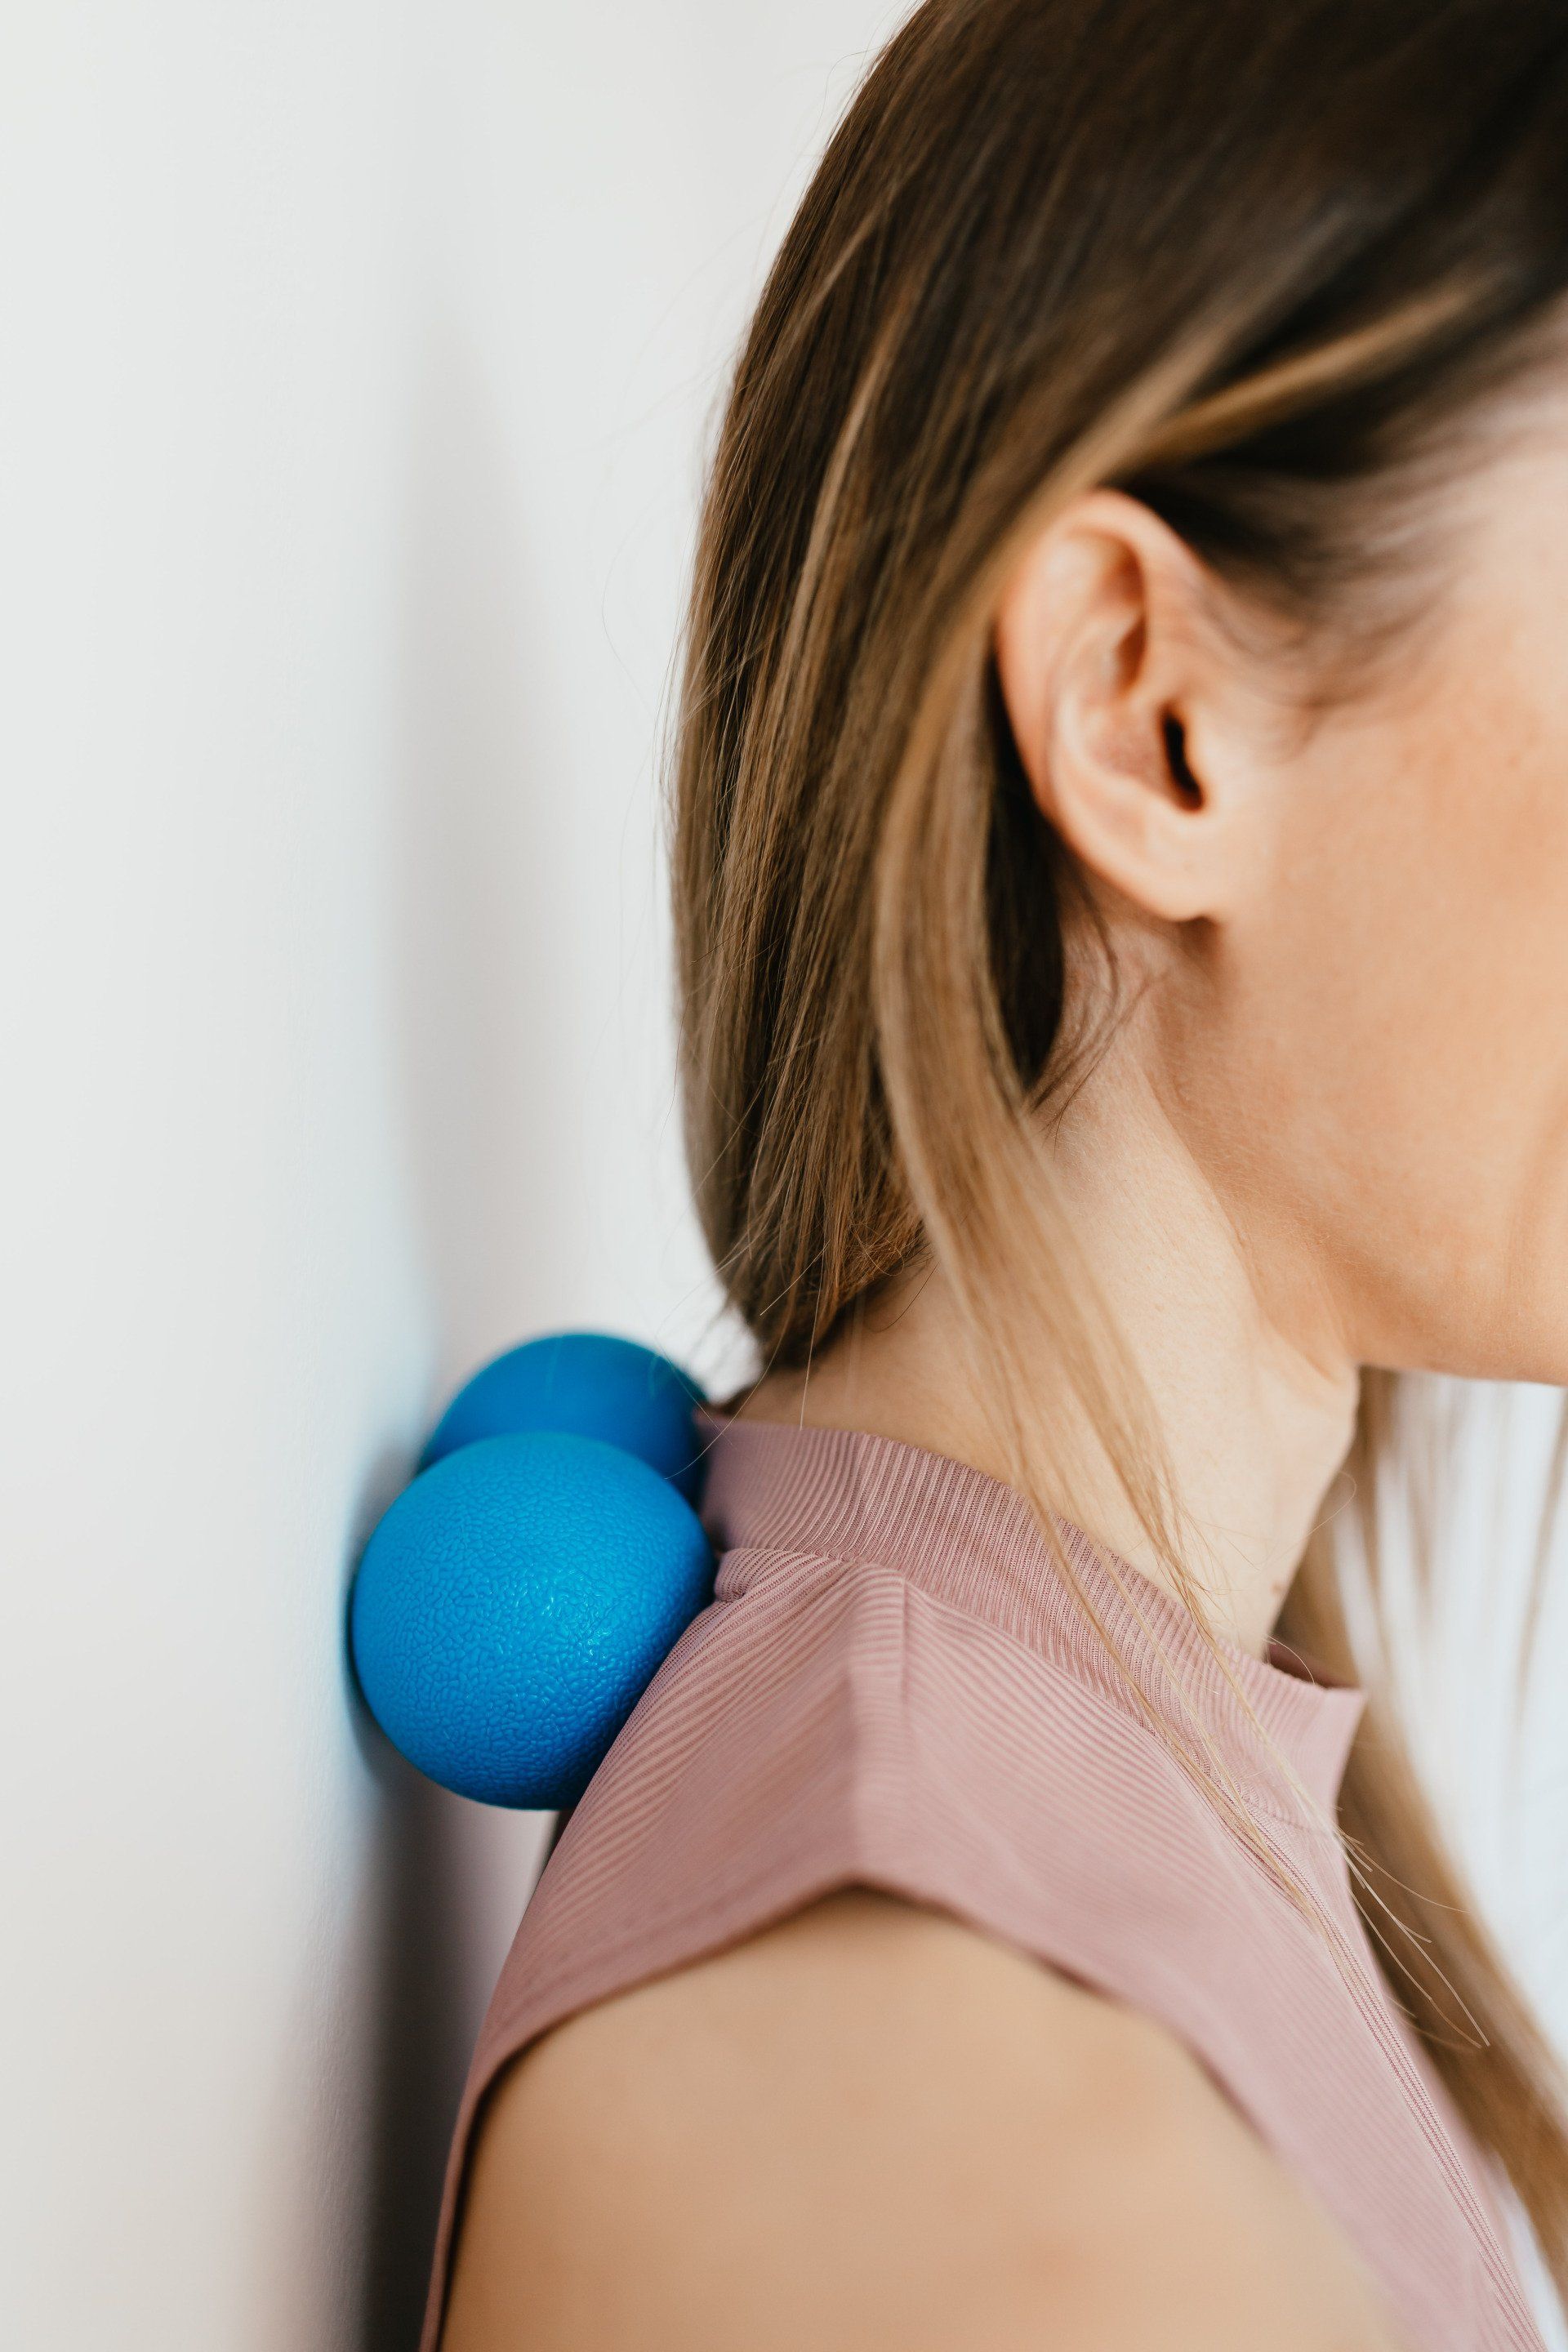 A woman is using a blue ball to massage her neck.